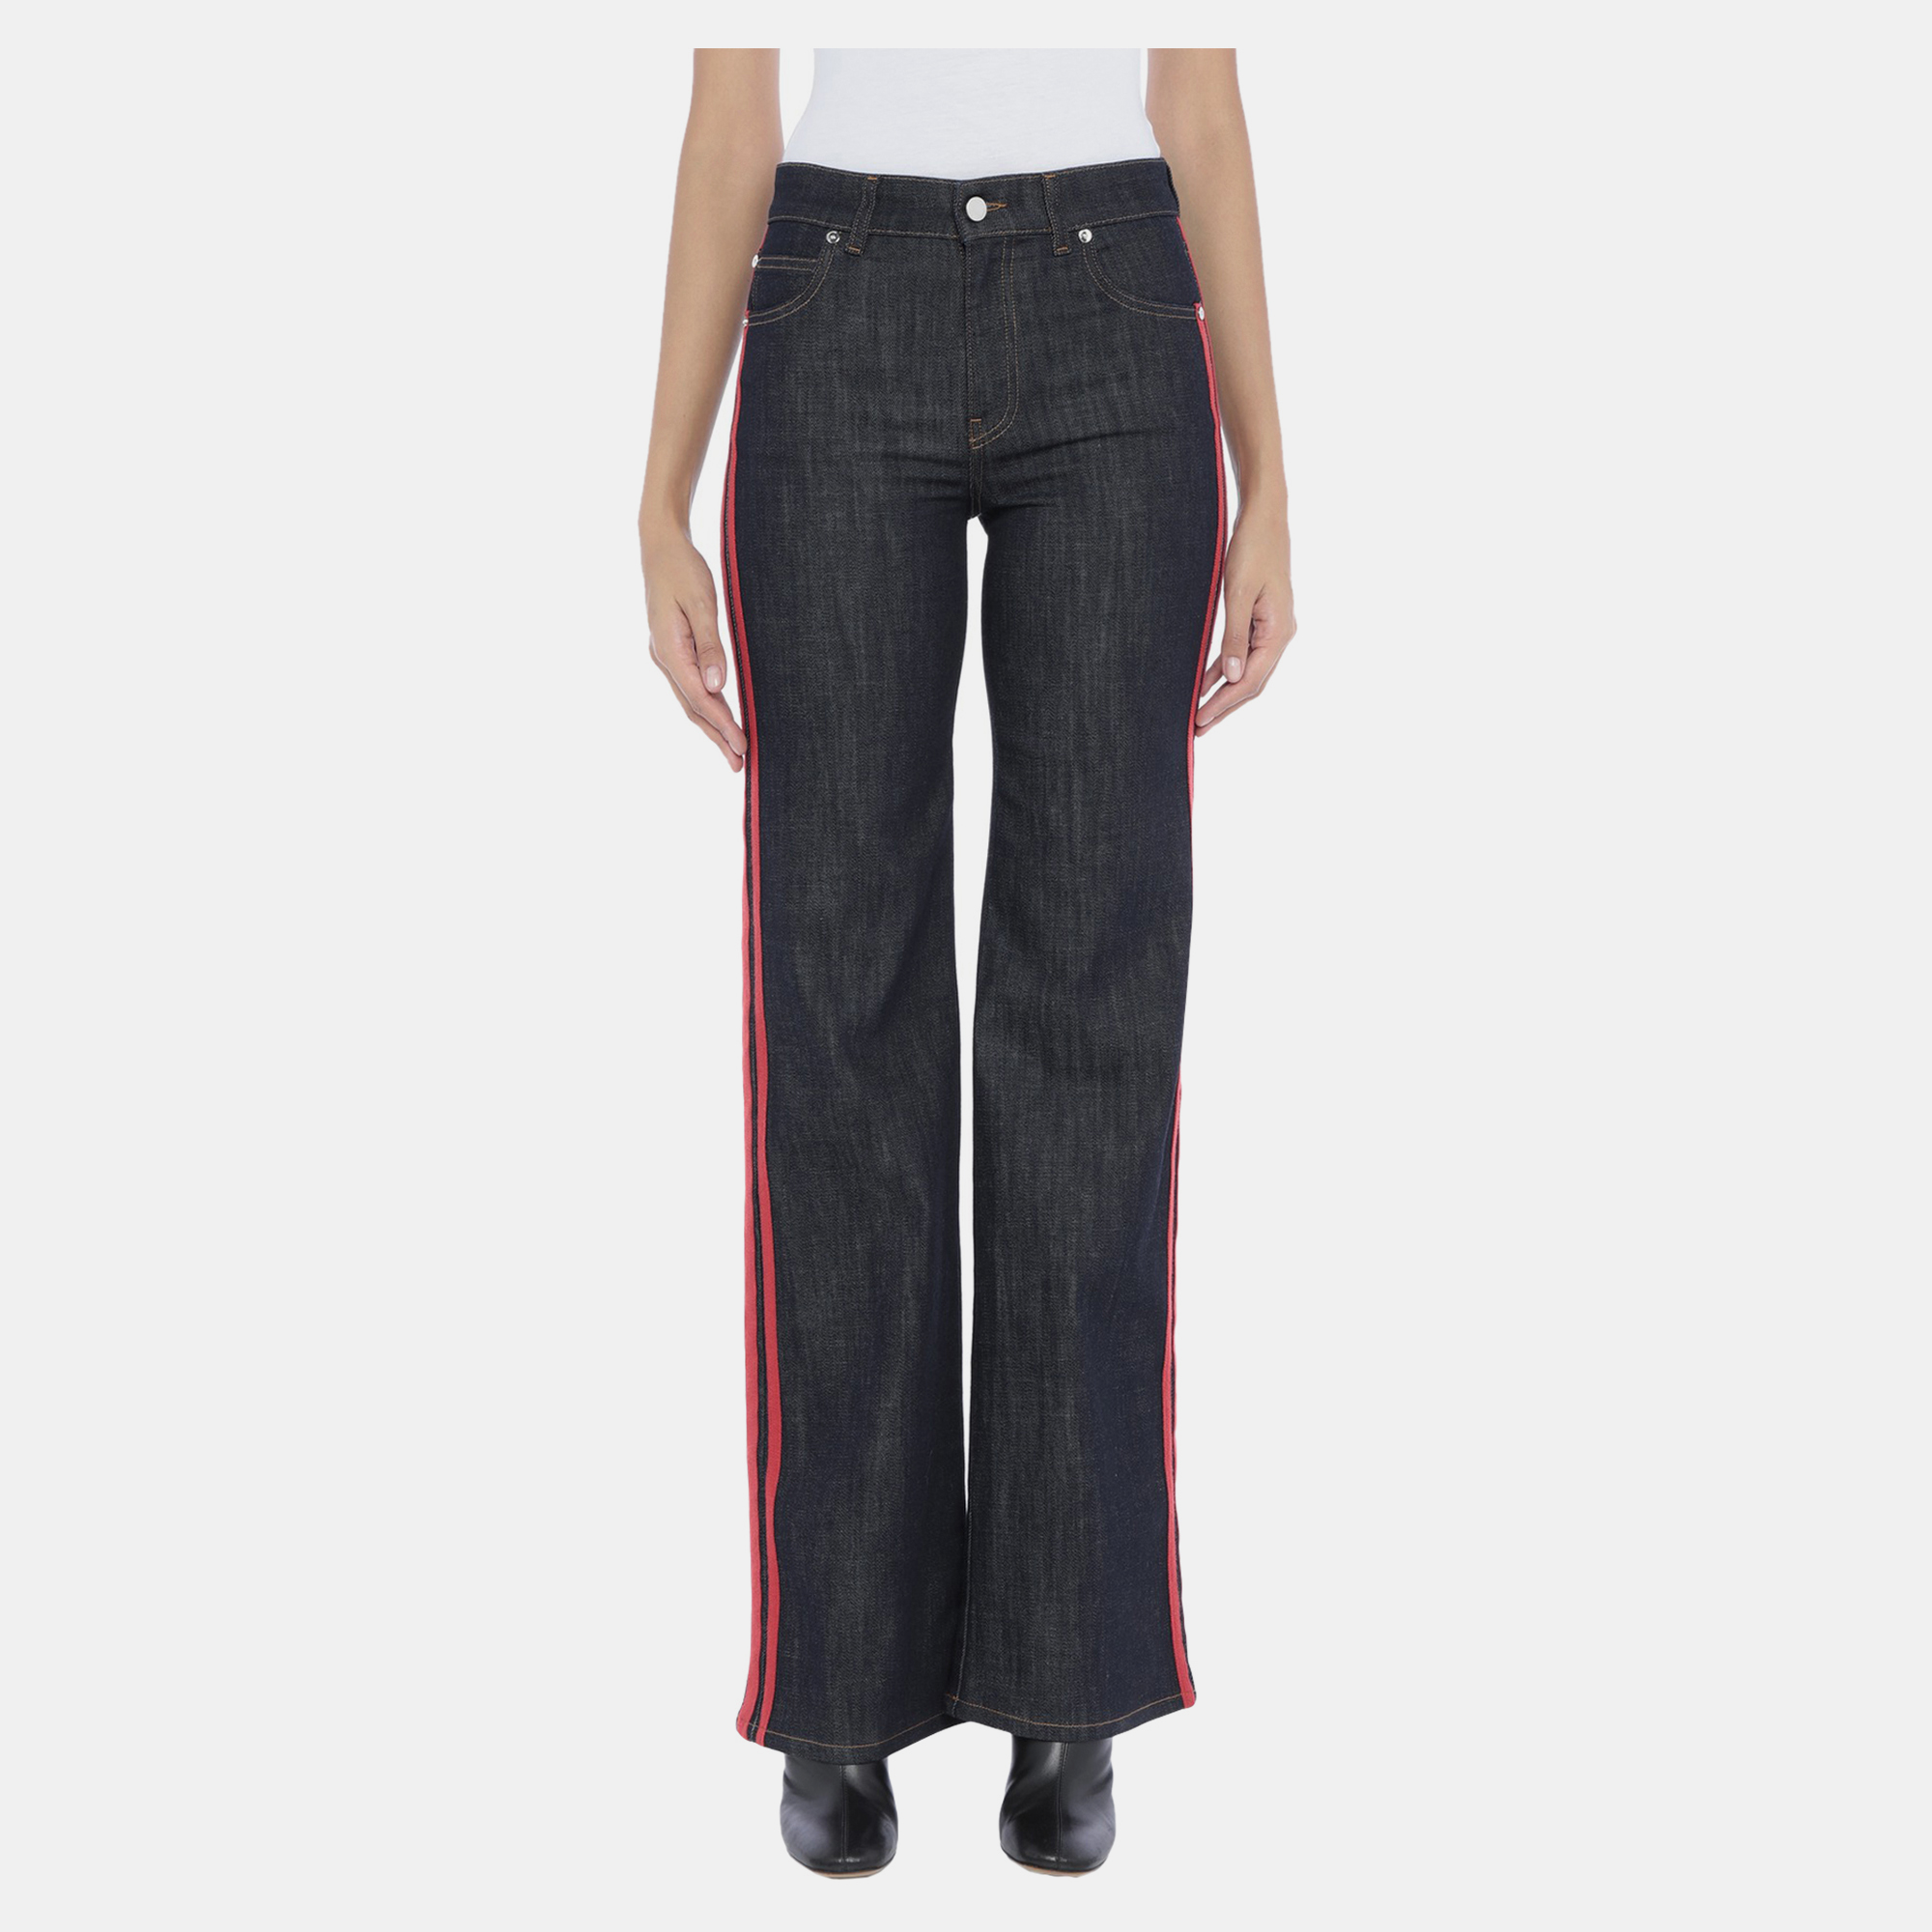 Red valentino cotton jeans 27